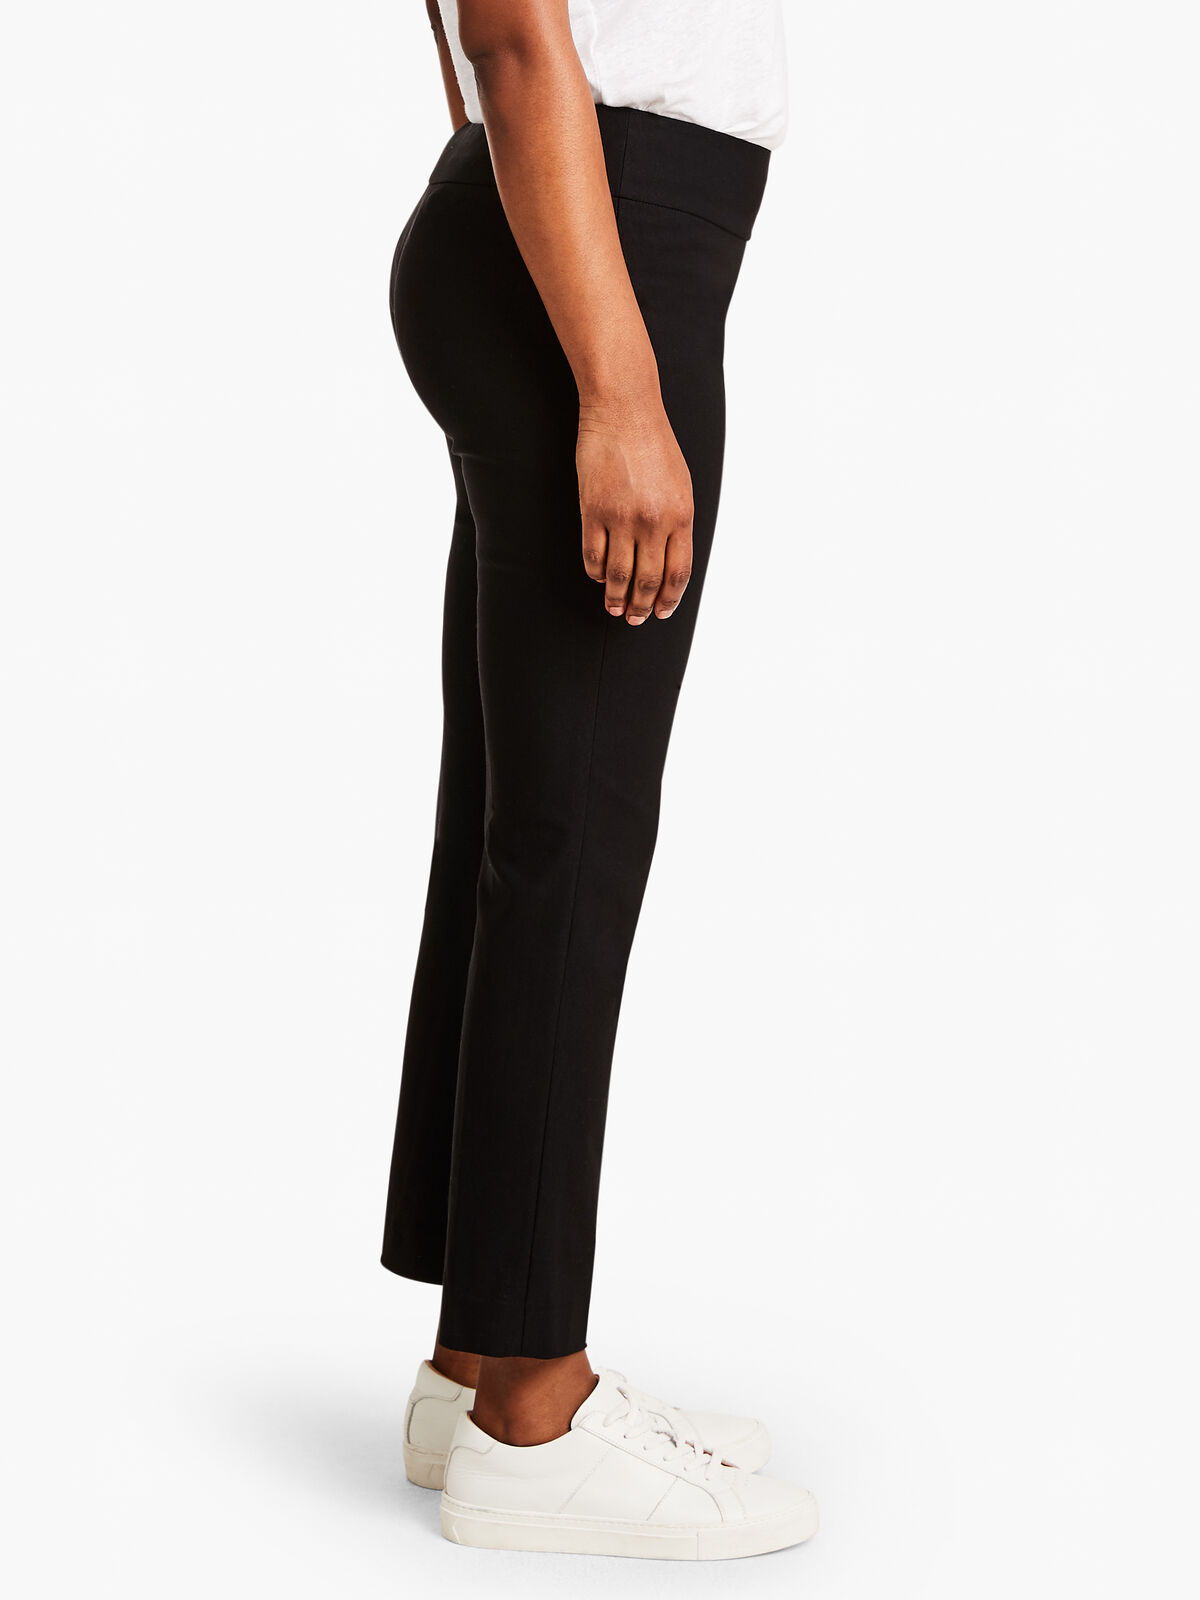 Wonderstretch Straight Ankle Pant